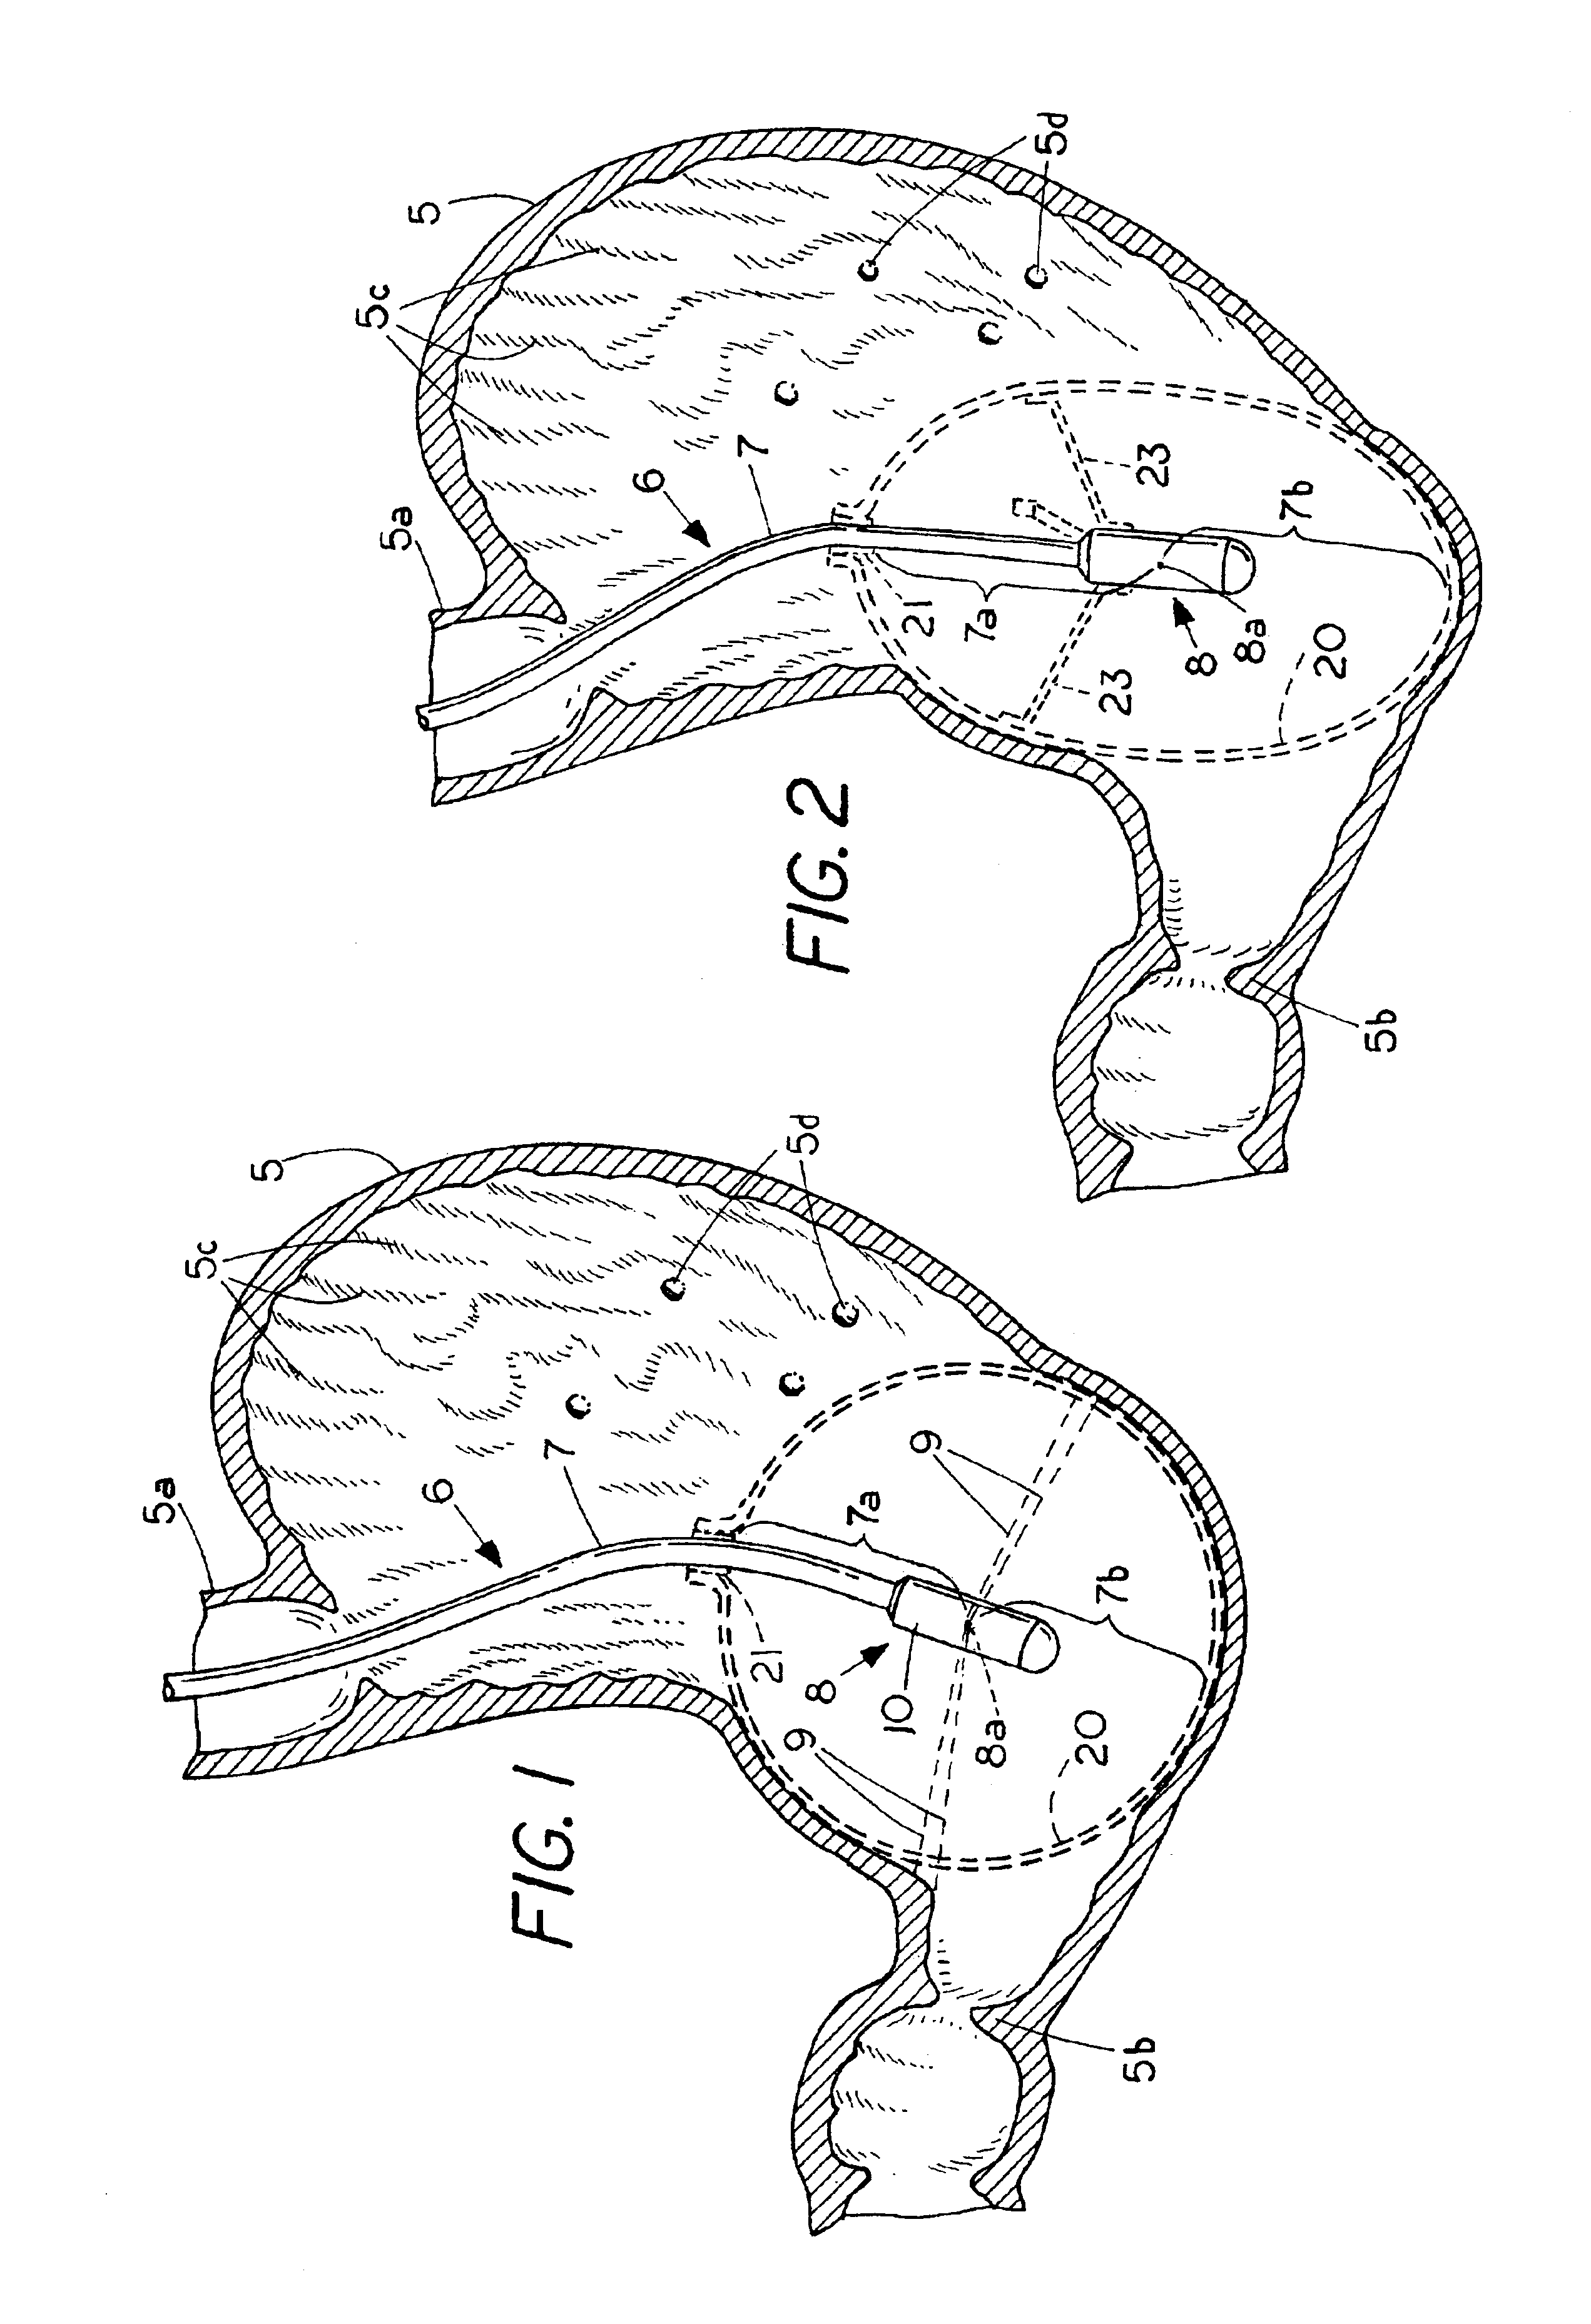 Apparatus and method for debilitating or killing microorganisms within the body